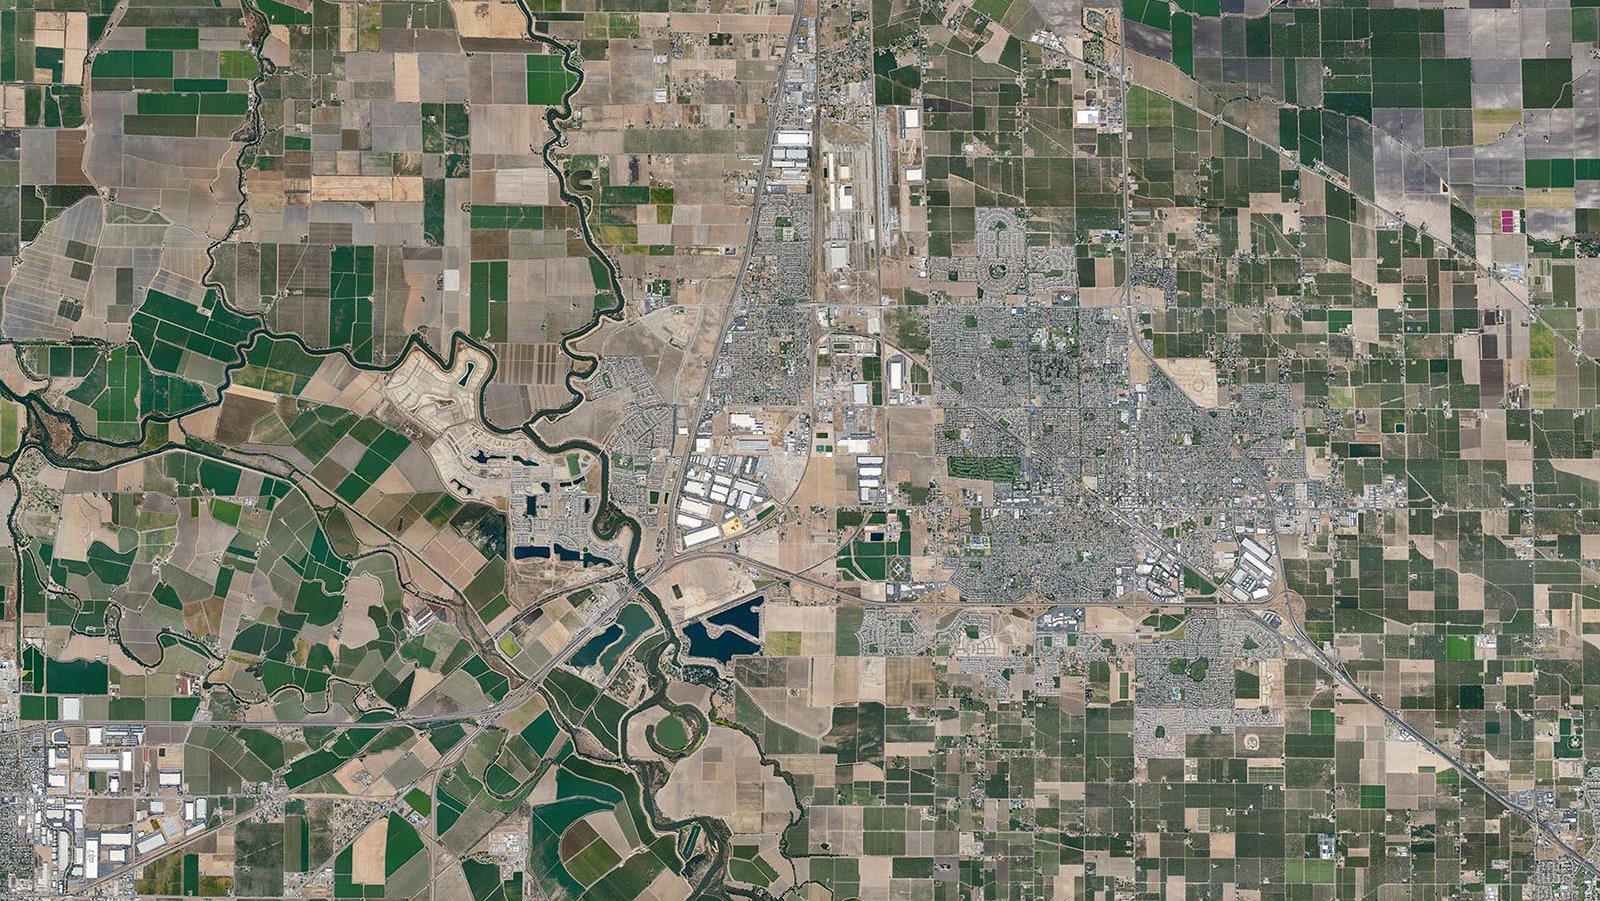 Mapping overview orthophoto image of the city of Manteca and city of Lathrop in California's Central Valley